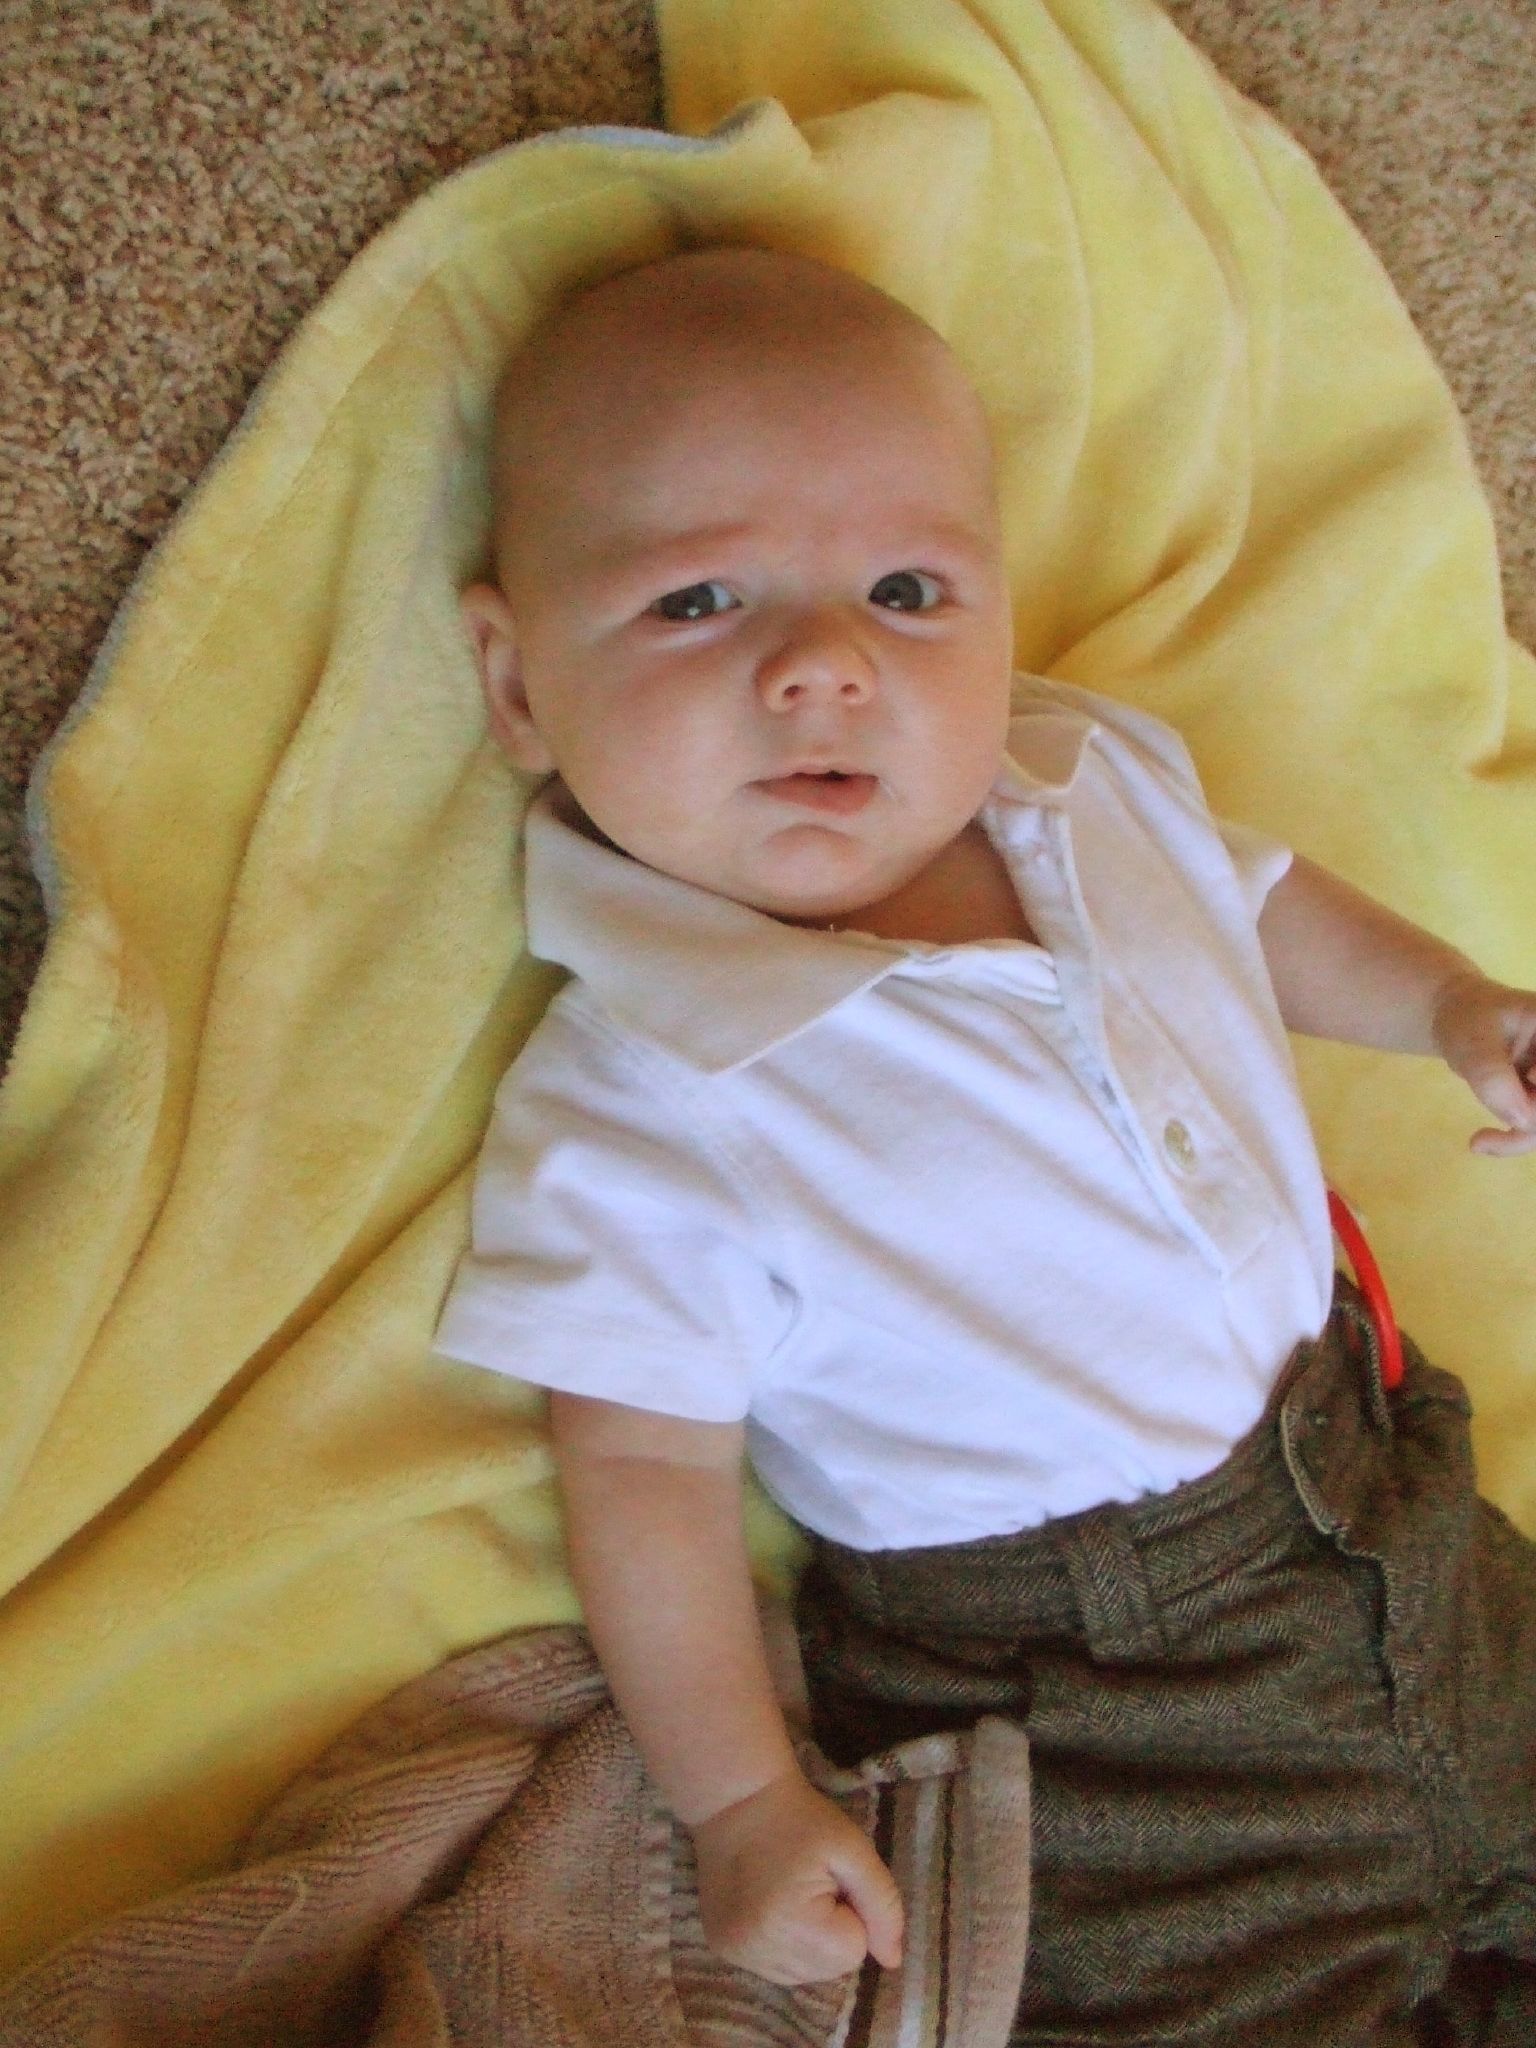 a baby with a shirt and tie laying on carpet